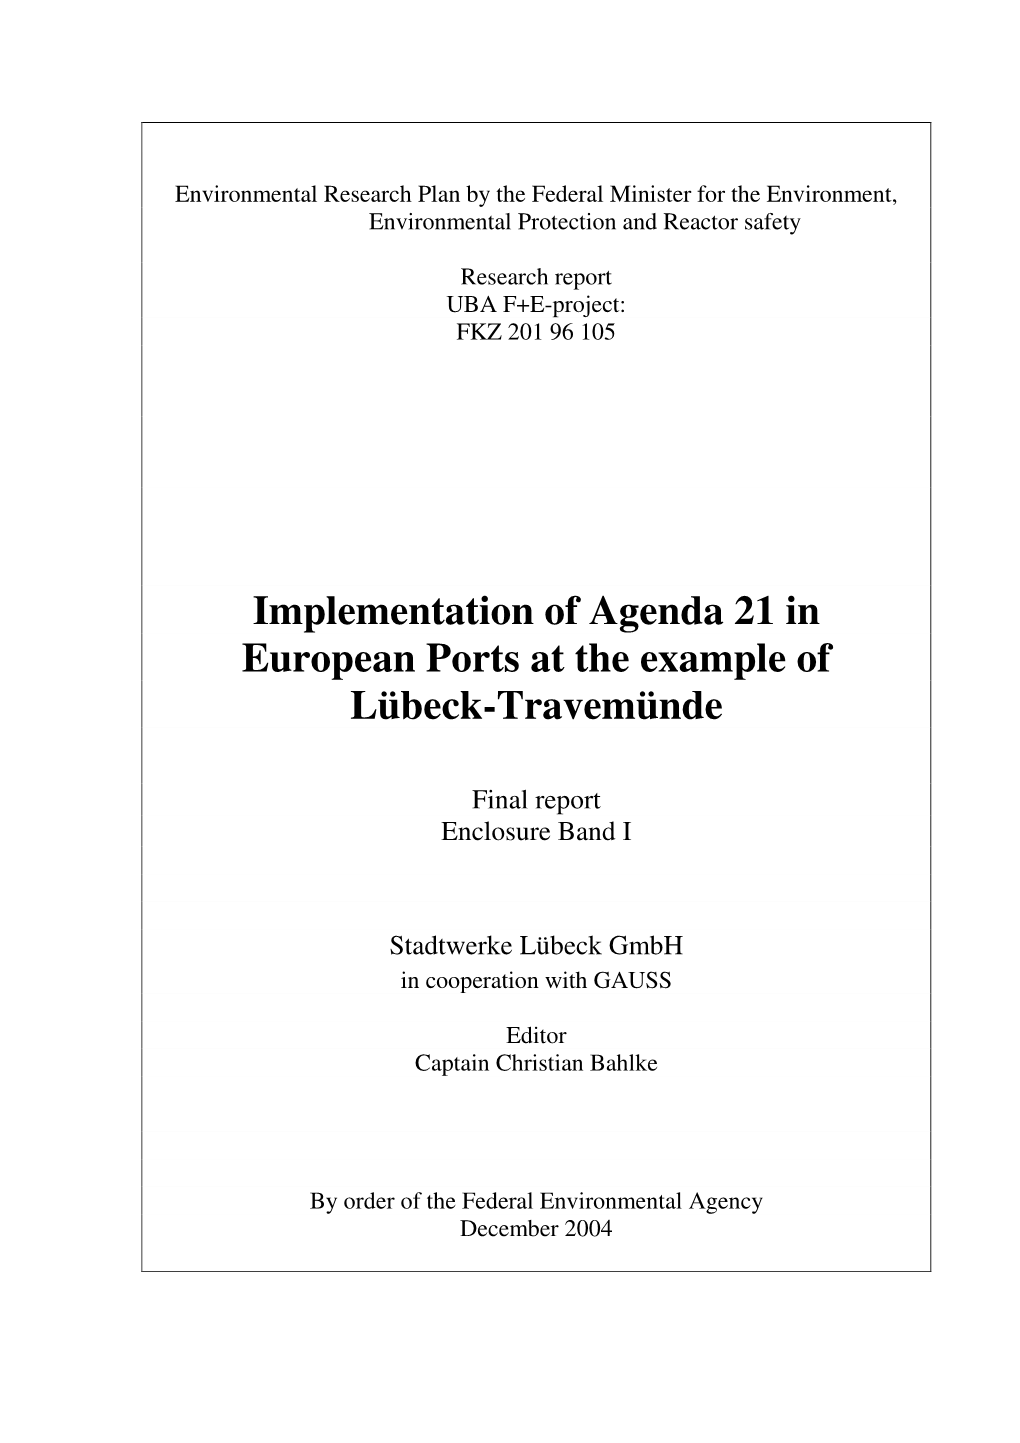 Implementation of Agenda 21 in European Ports at the Example of Lübeck-Travemünde